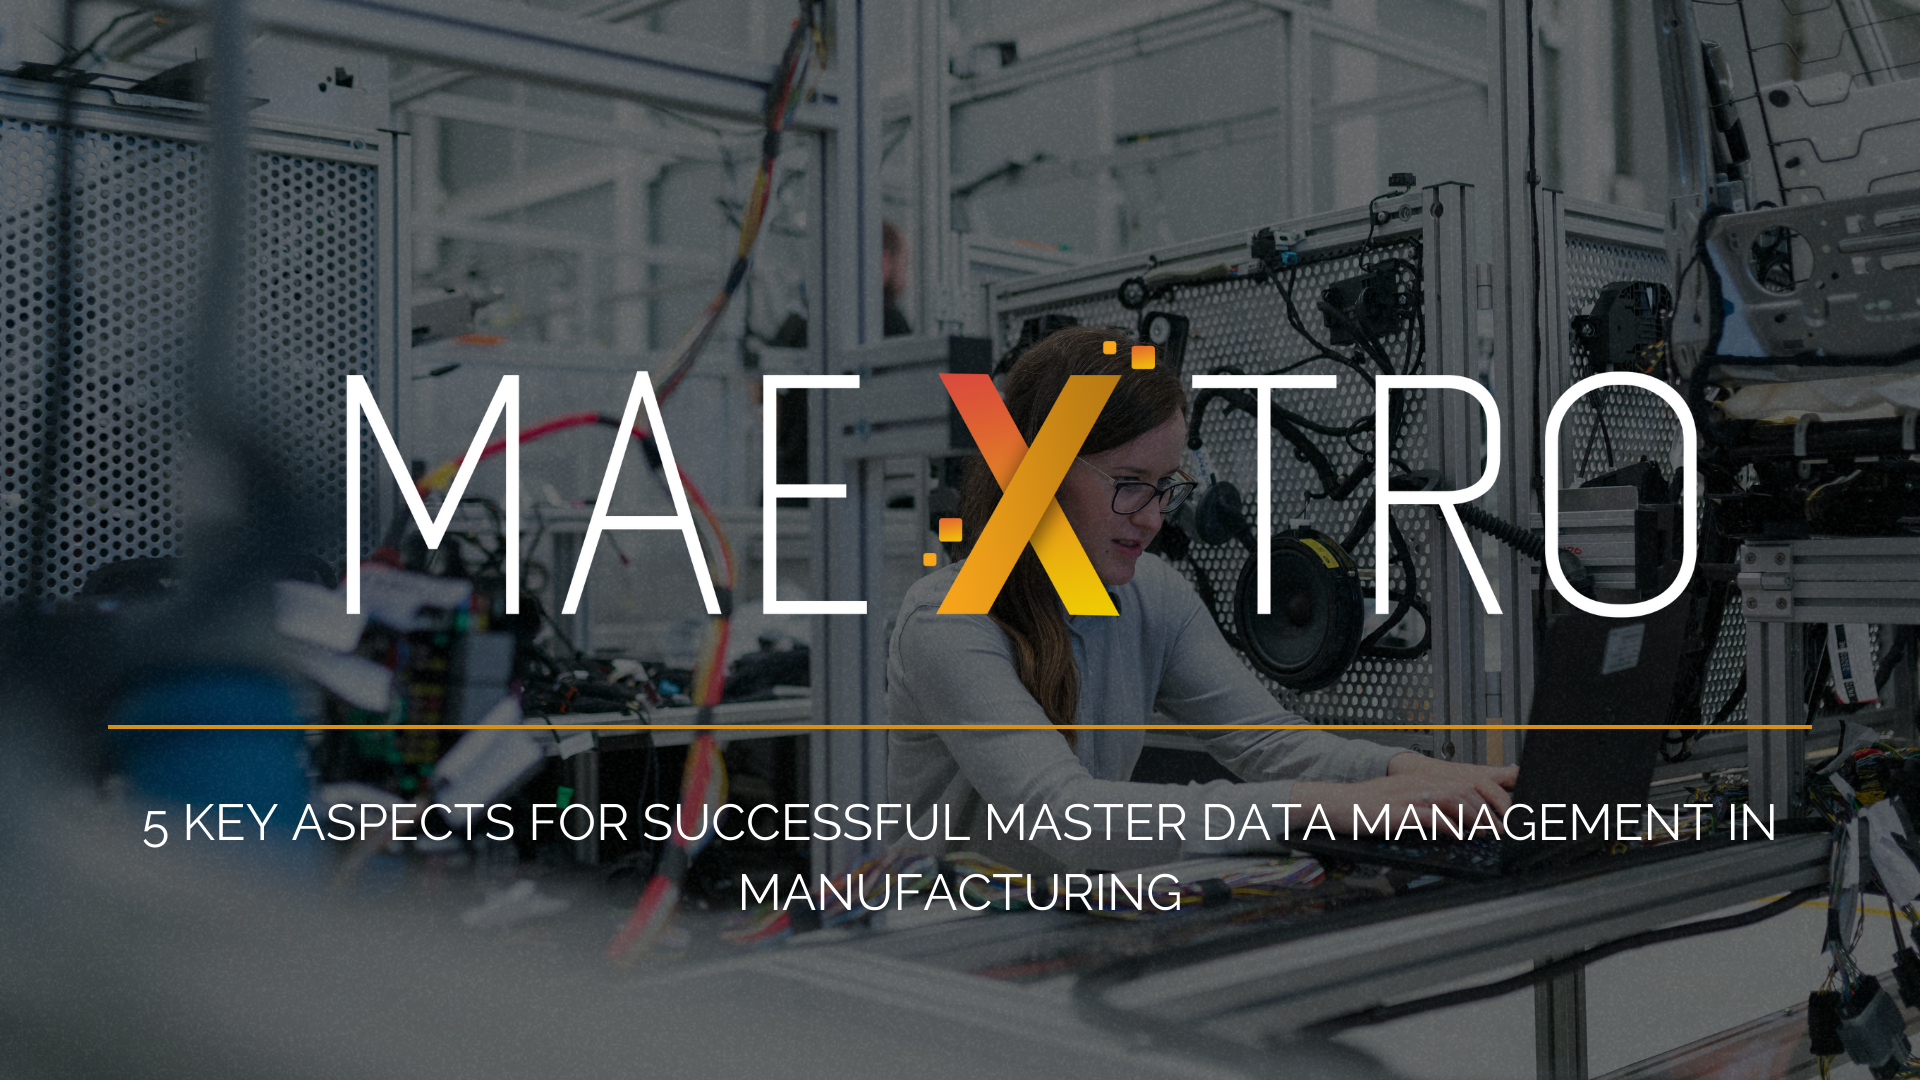 5 KEY ASPECTS FOR SUCCESSFUL MASTER DATA MANAGEMENT IN MANUFACTURING